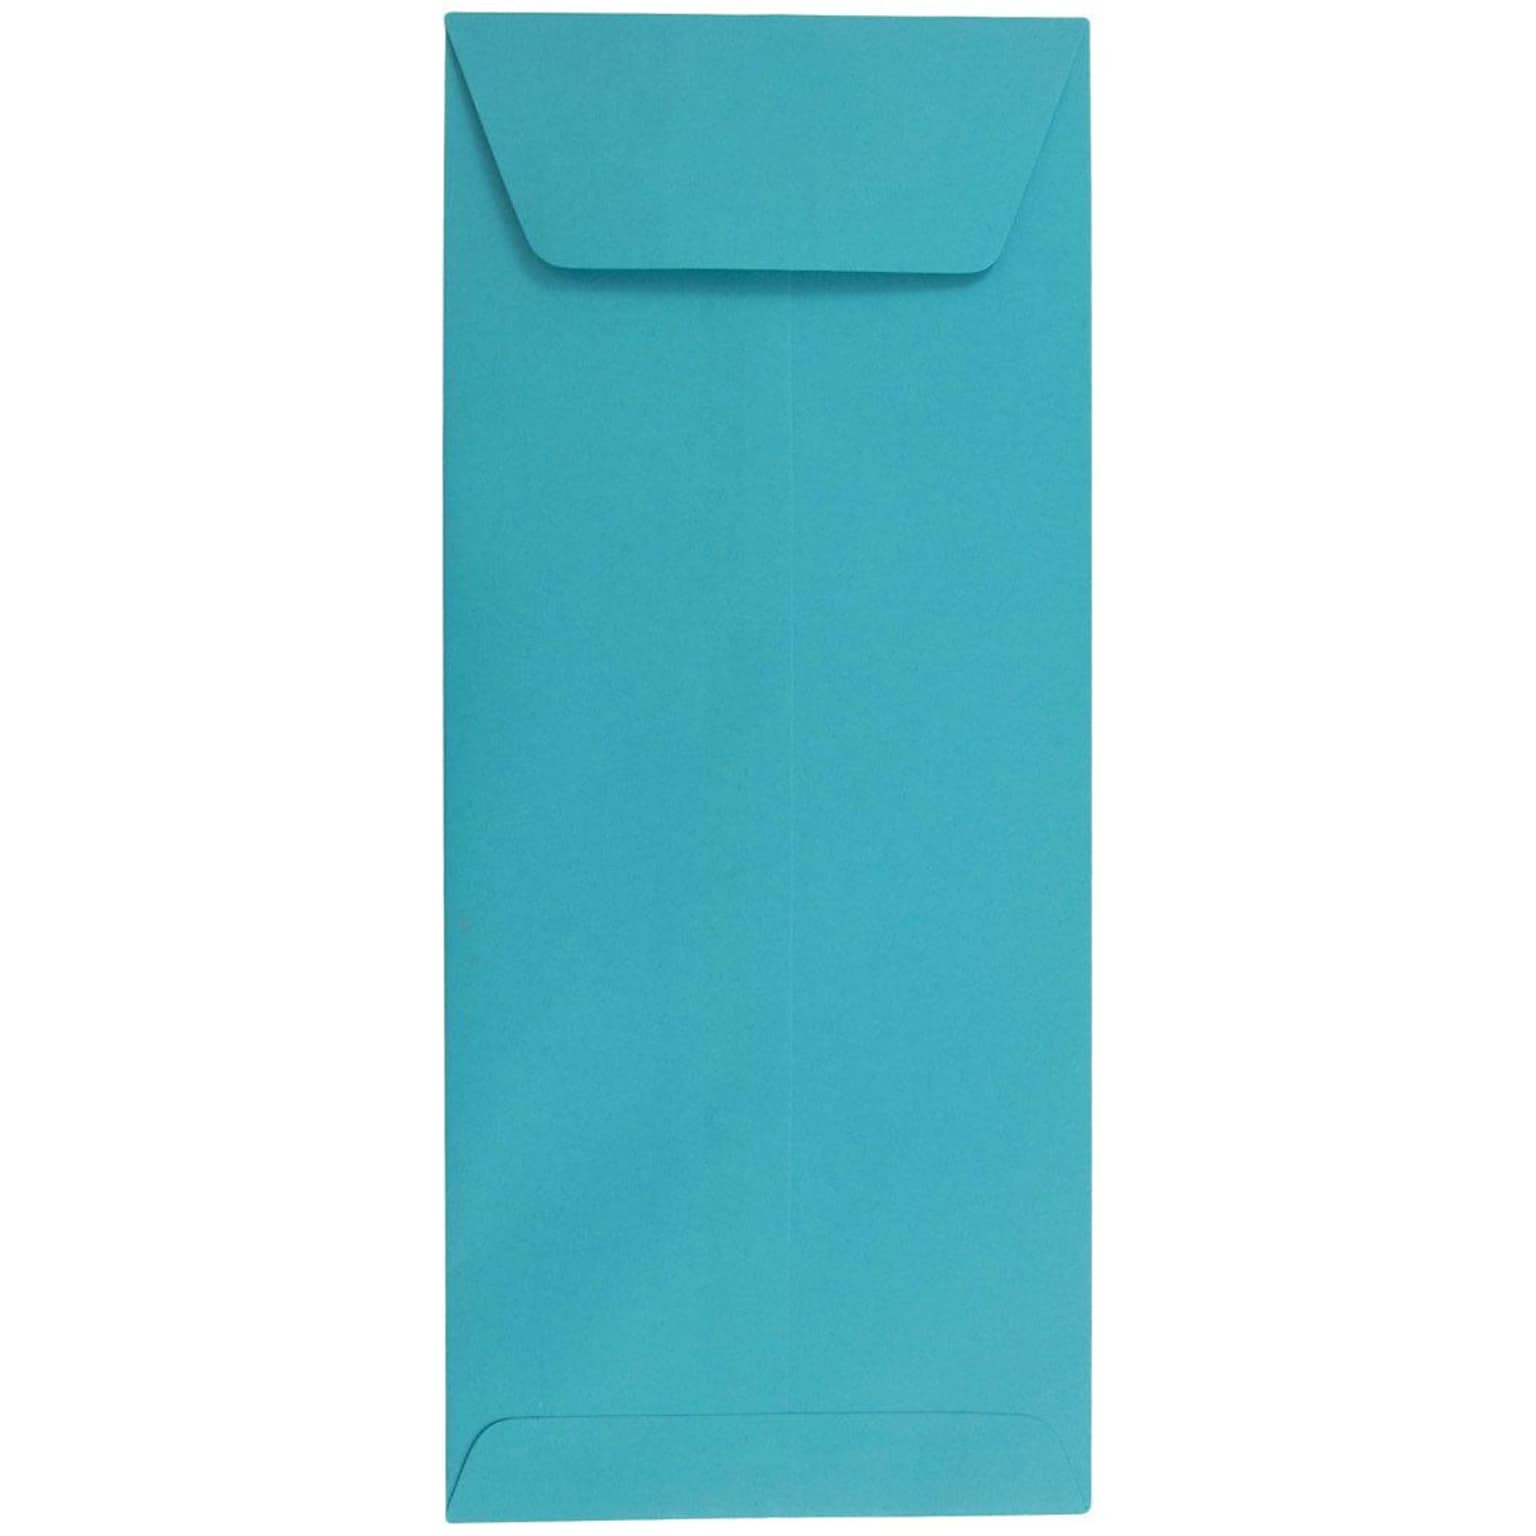 JAM Paper #12 Policy Business Colored Envelopes, 4.75 x 11, Sea Blue Recycled, 25/Pack (3156397)